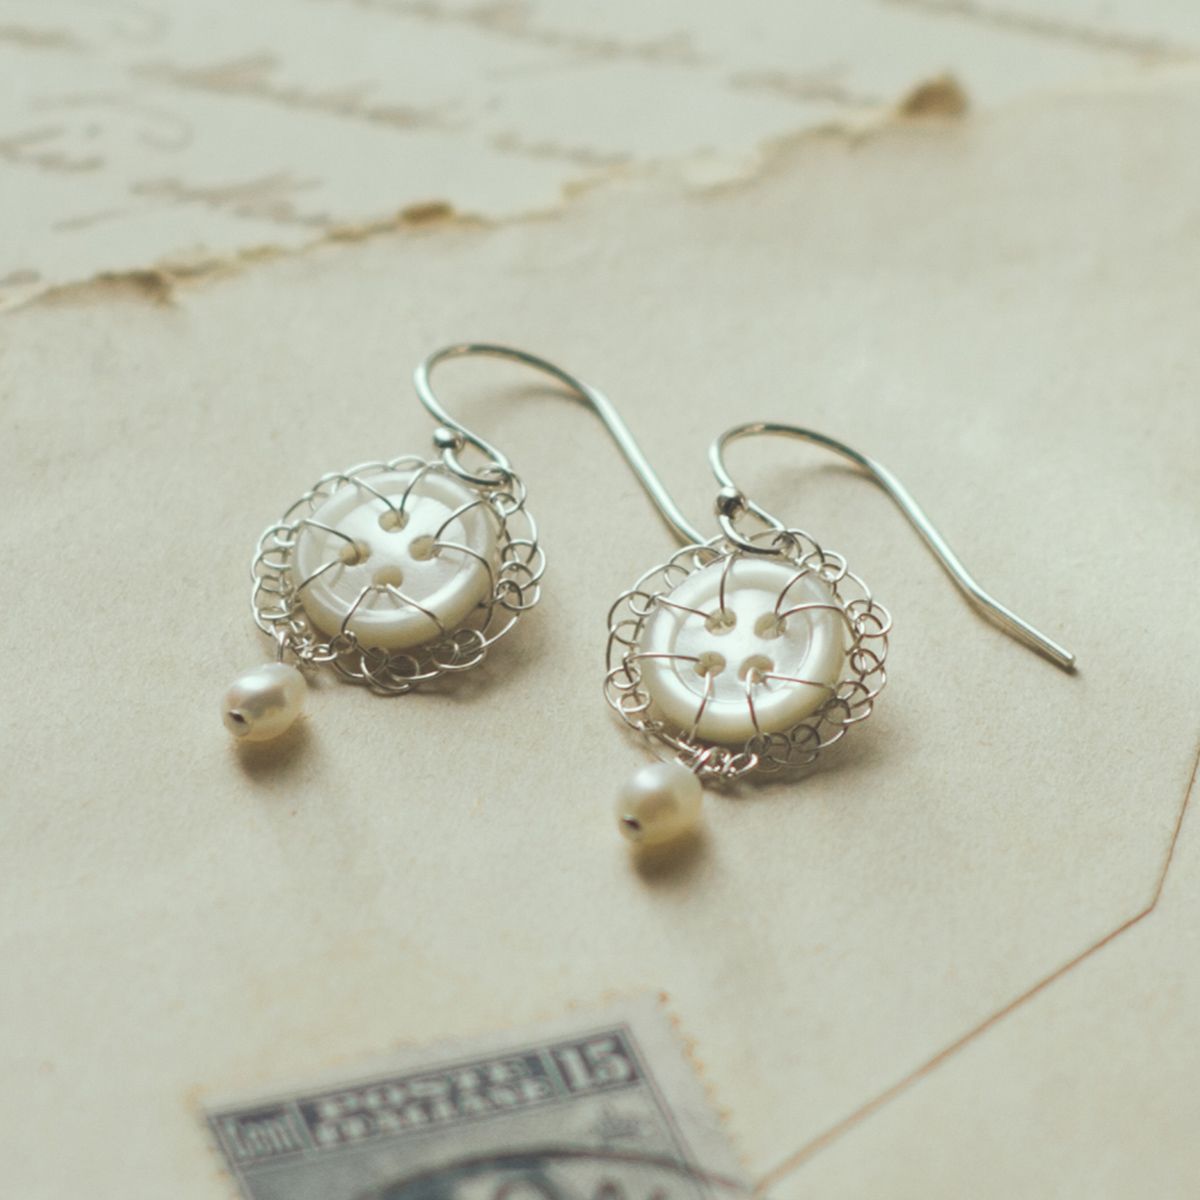 Antique button jewellery